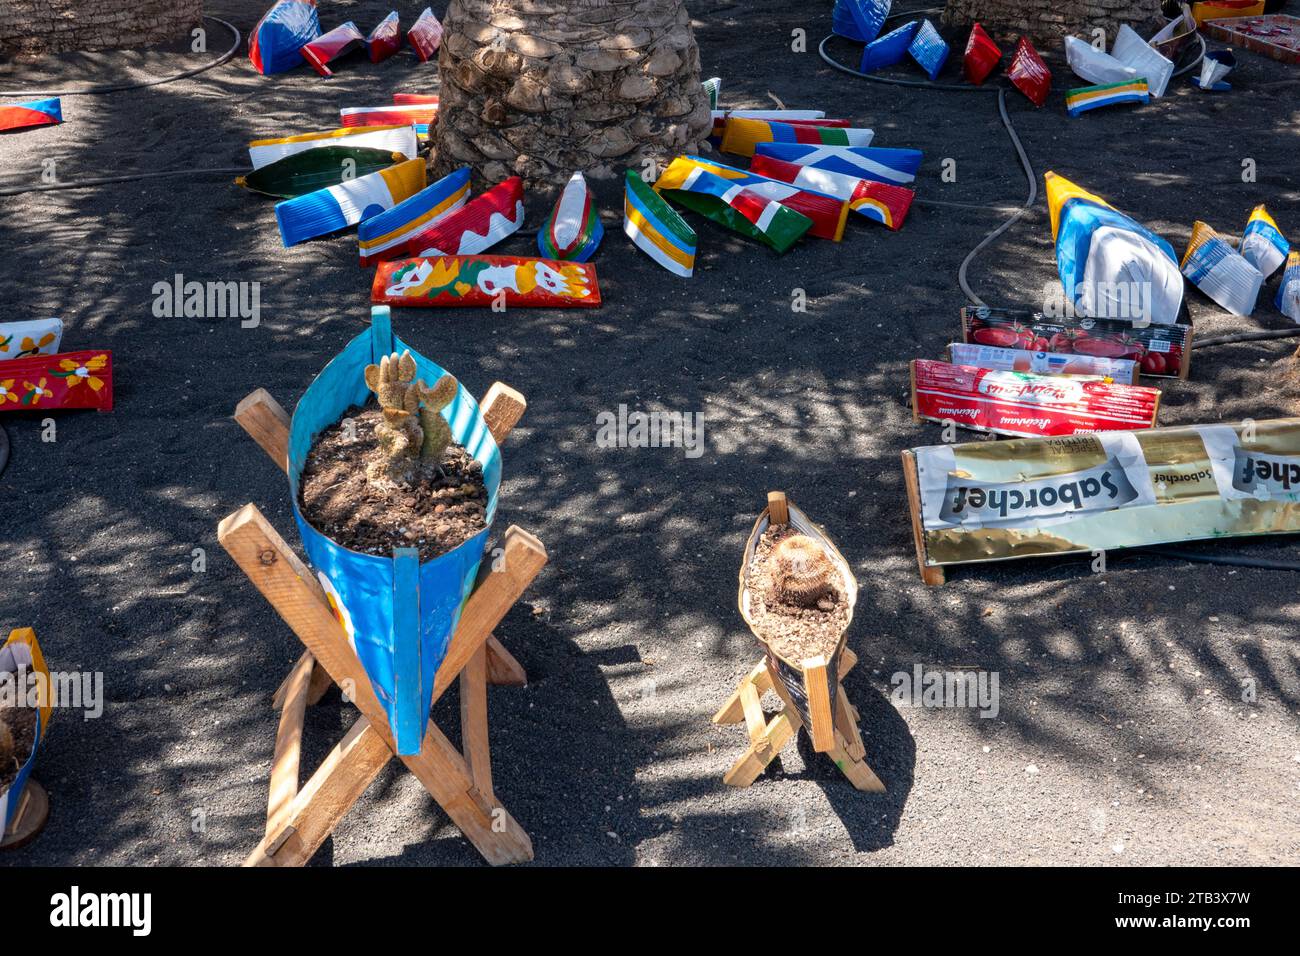 Arrecife, Lanzarote, Canary Islands, Spain - April 24, 2023: Jolateros are small boats made by hand from cans and recycled drums. It is a typical Lanz Stock Photo